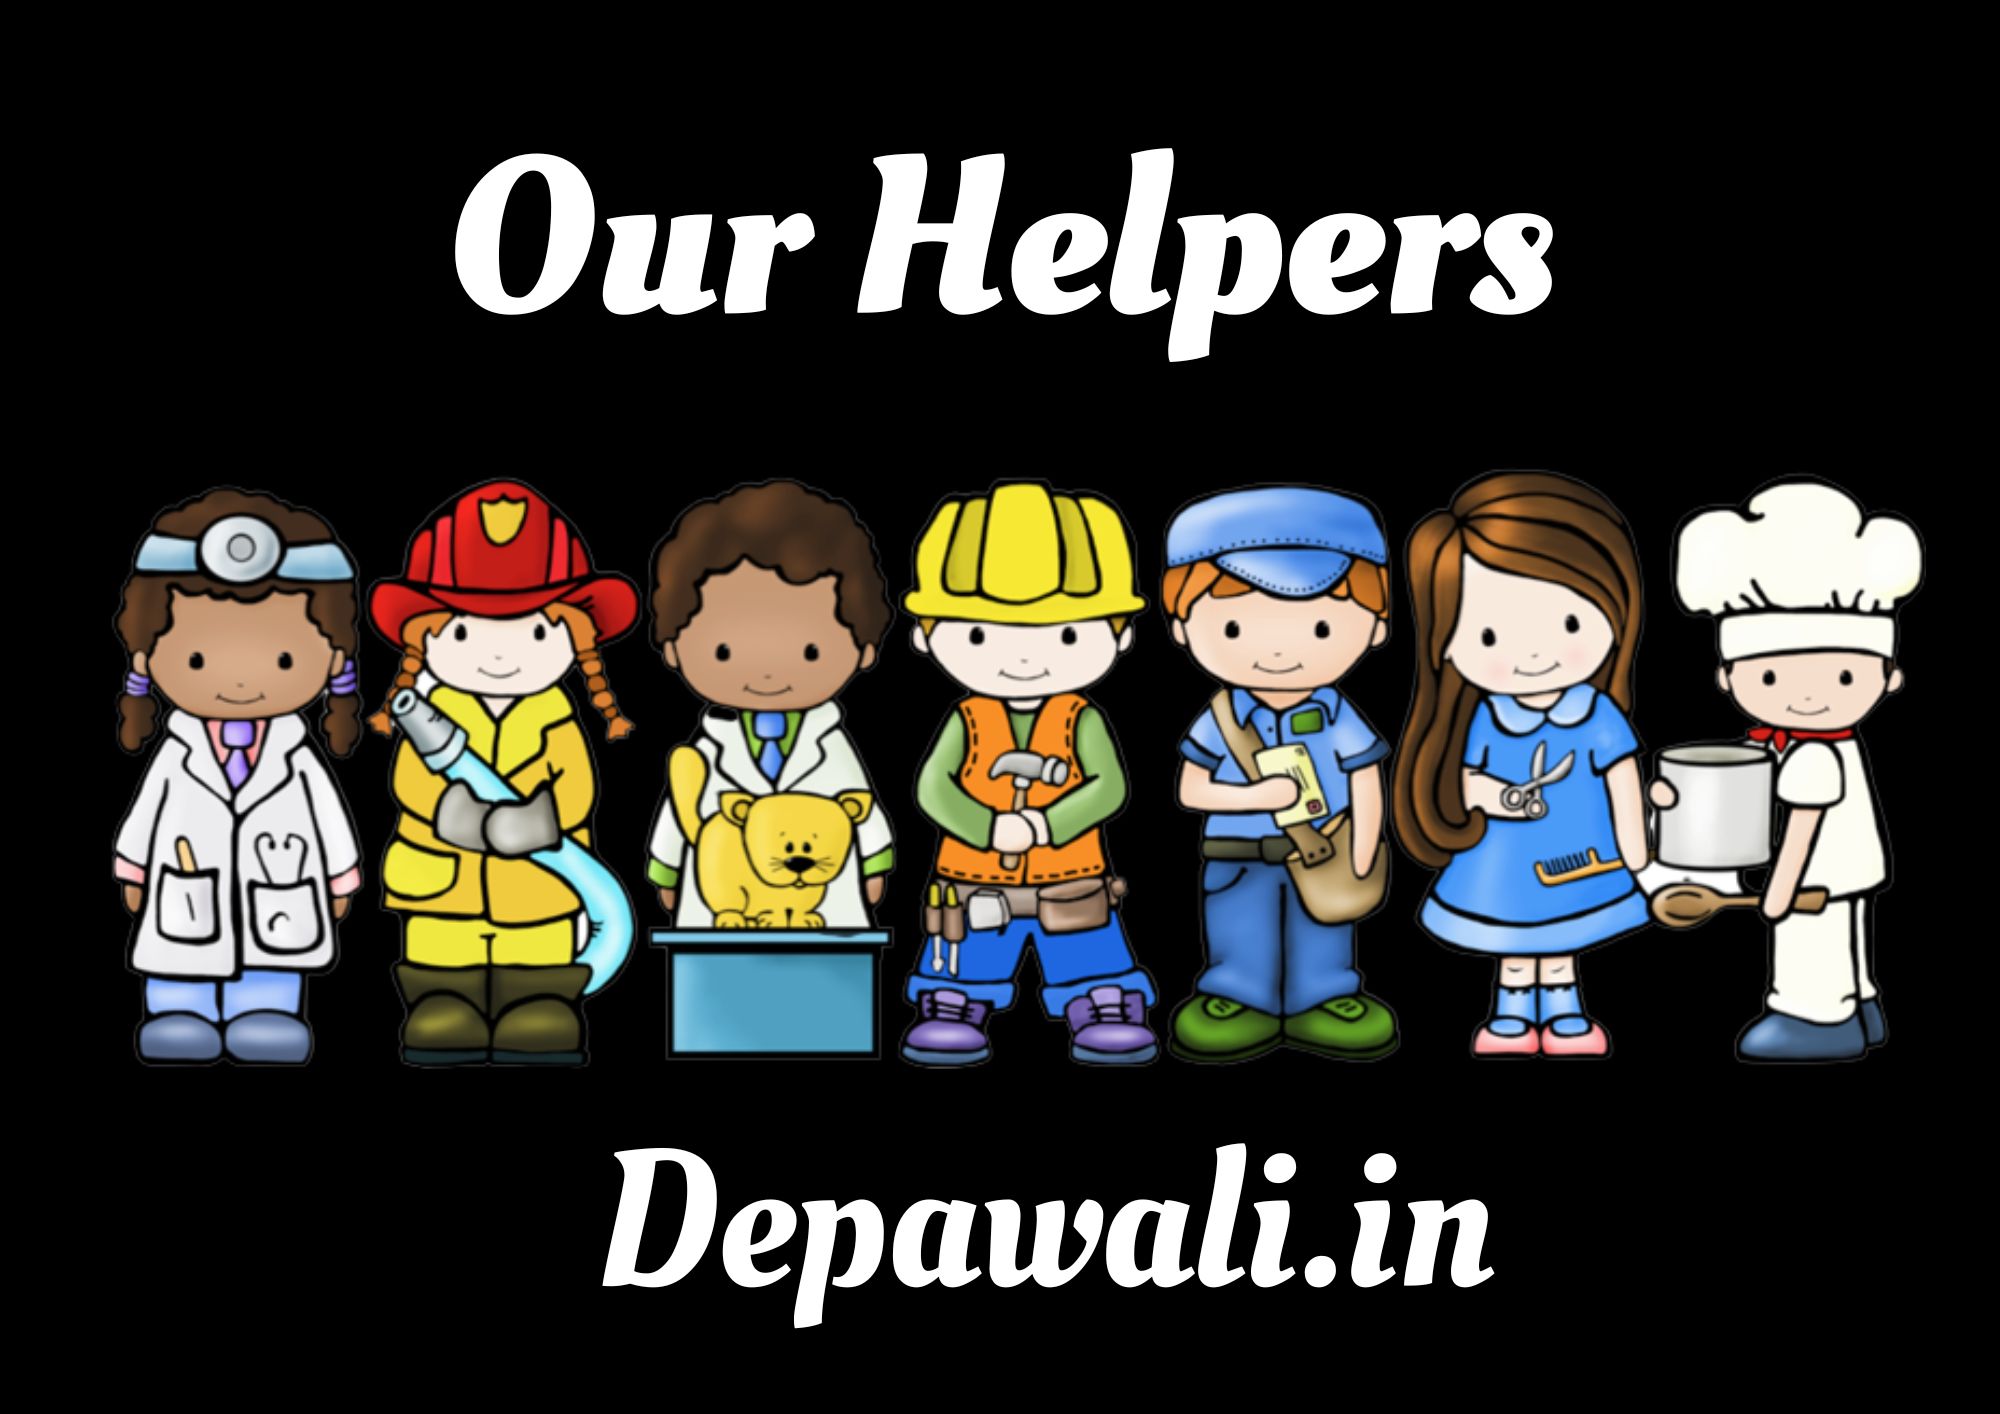 Our Helpers Name In Hindi And English | 50 Our Helpers Name In Hindi | 50 Helpers Name In English | 10 Our Helpers Name In Hindi | 10 Helpers Name In English